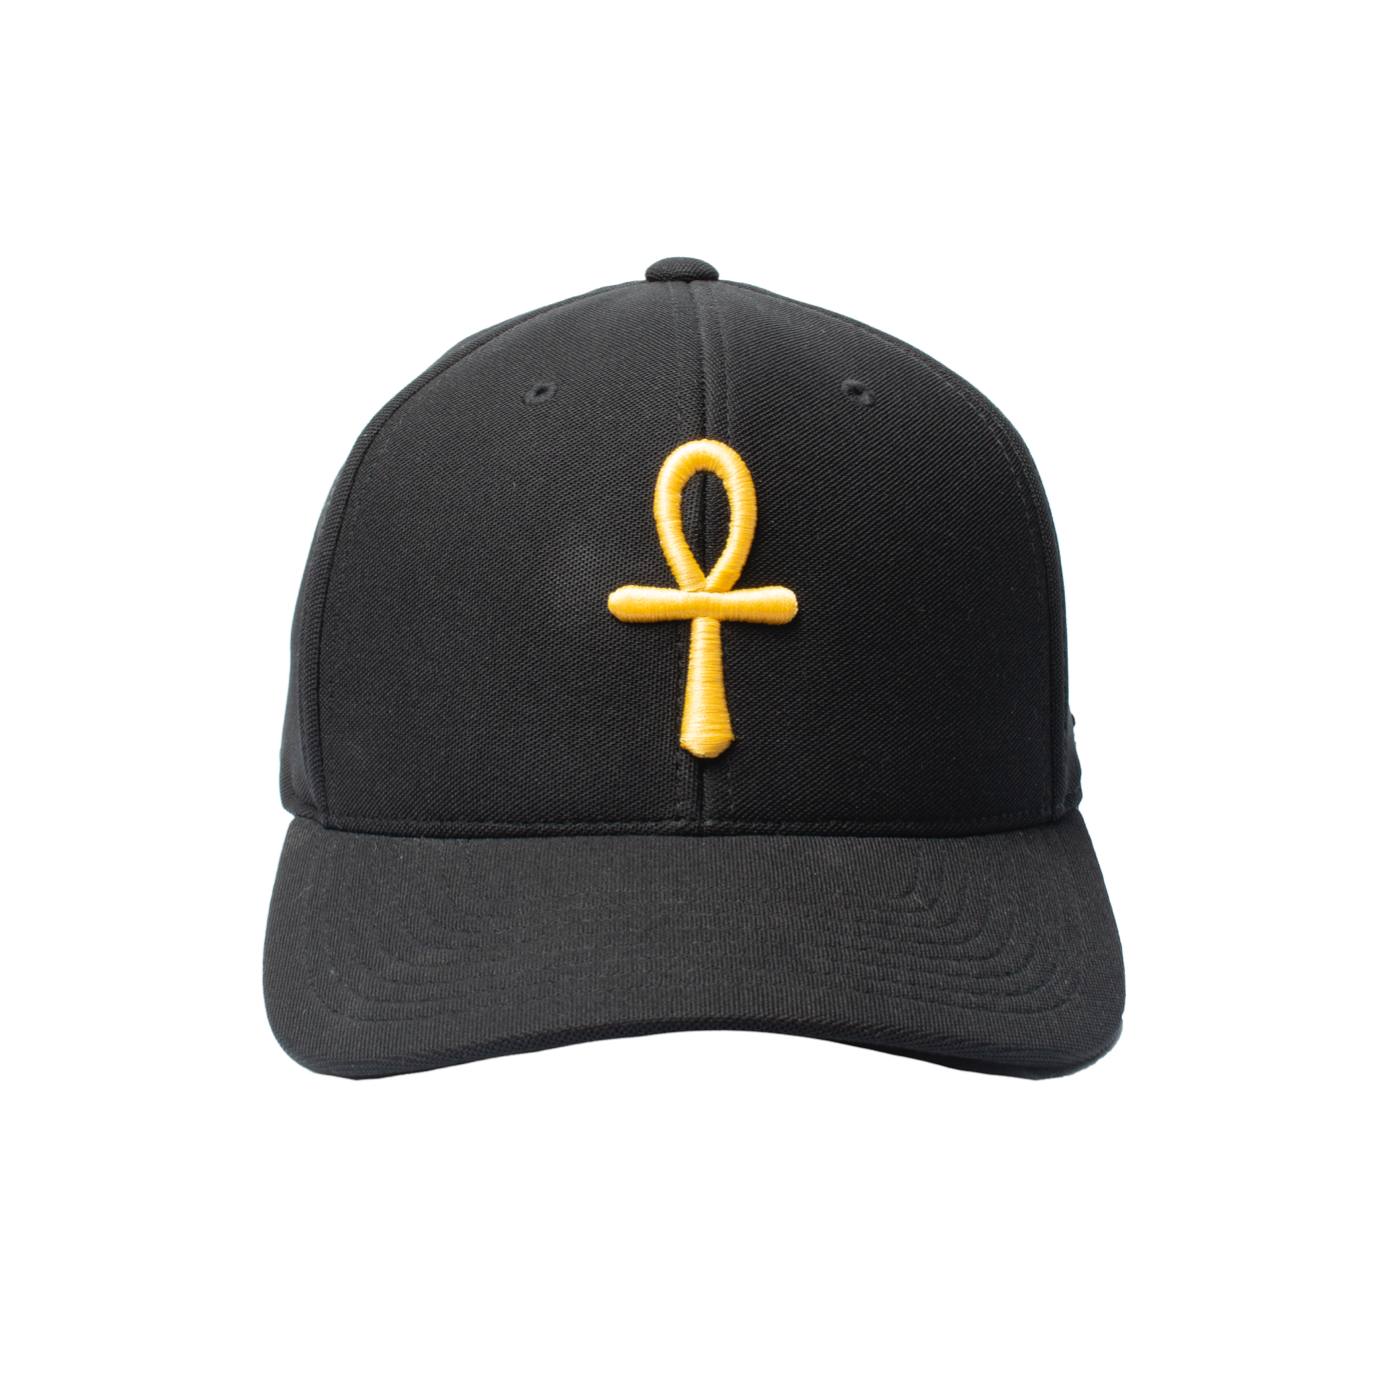 Ankh Flexfit cap(with cool & dry technology)